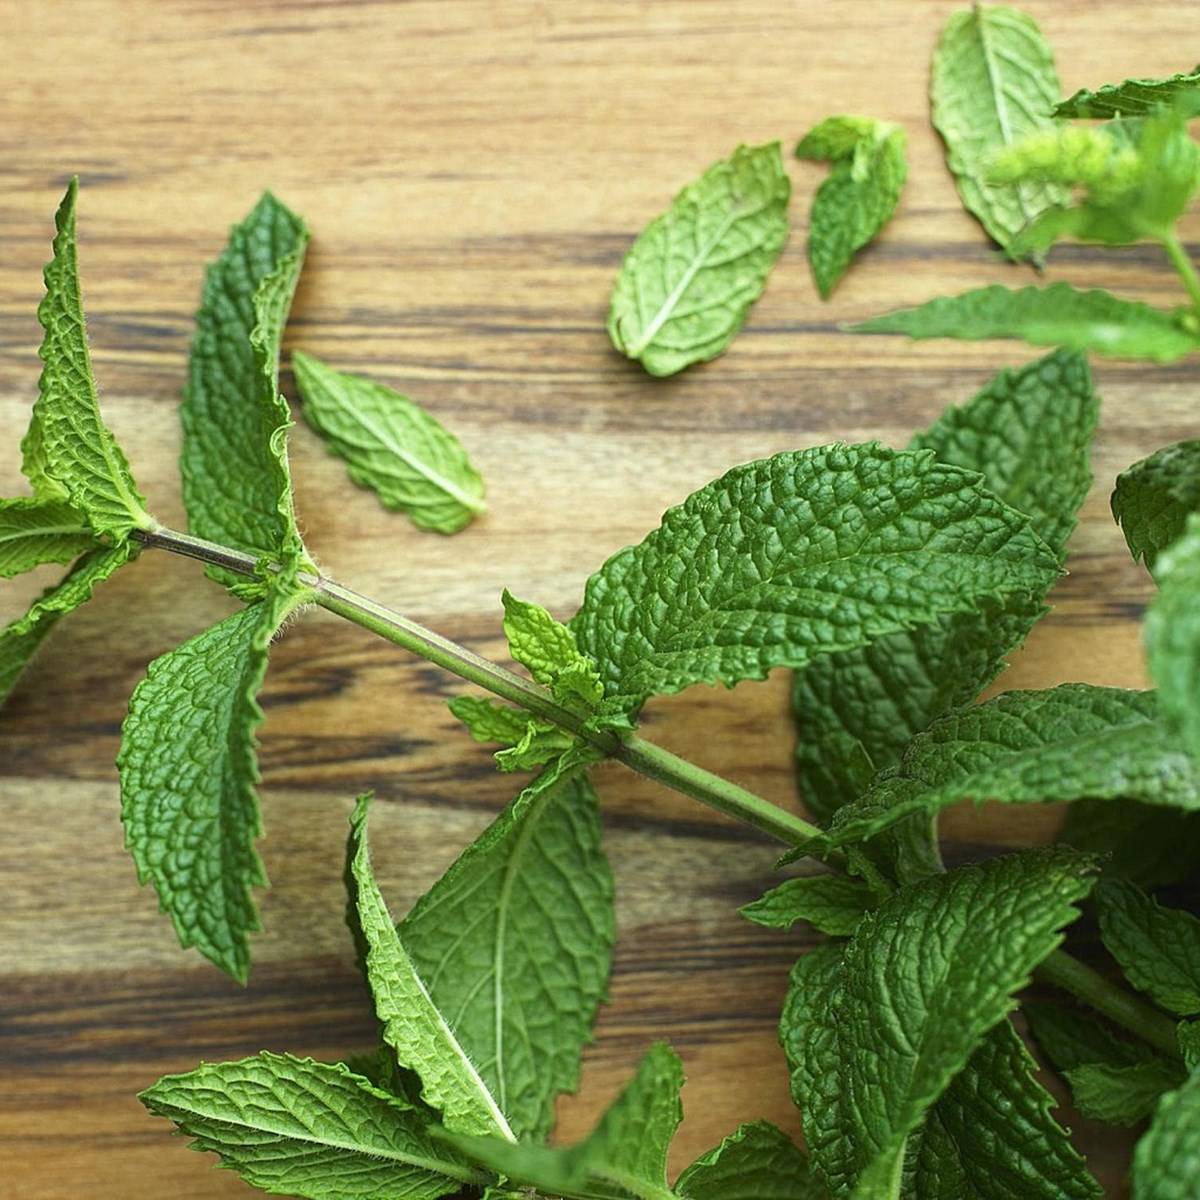 Mint leaves are effective in aiding digestion